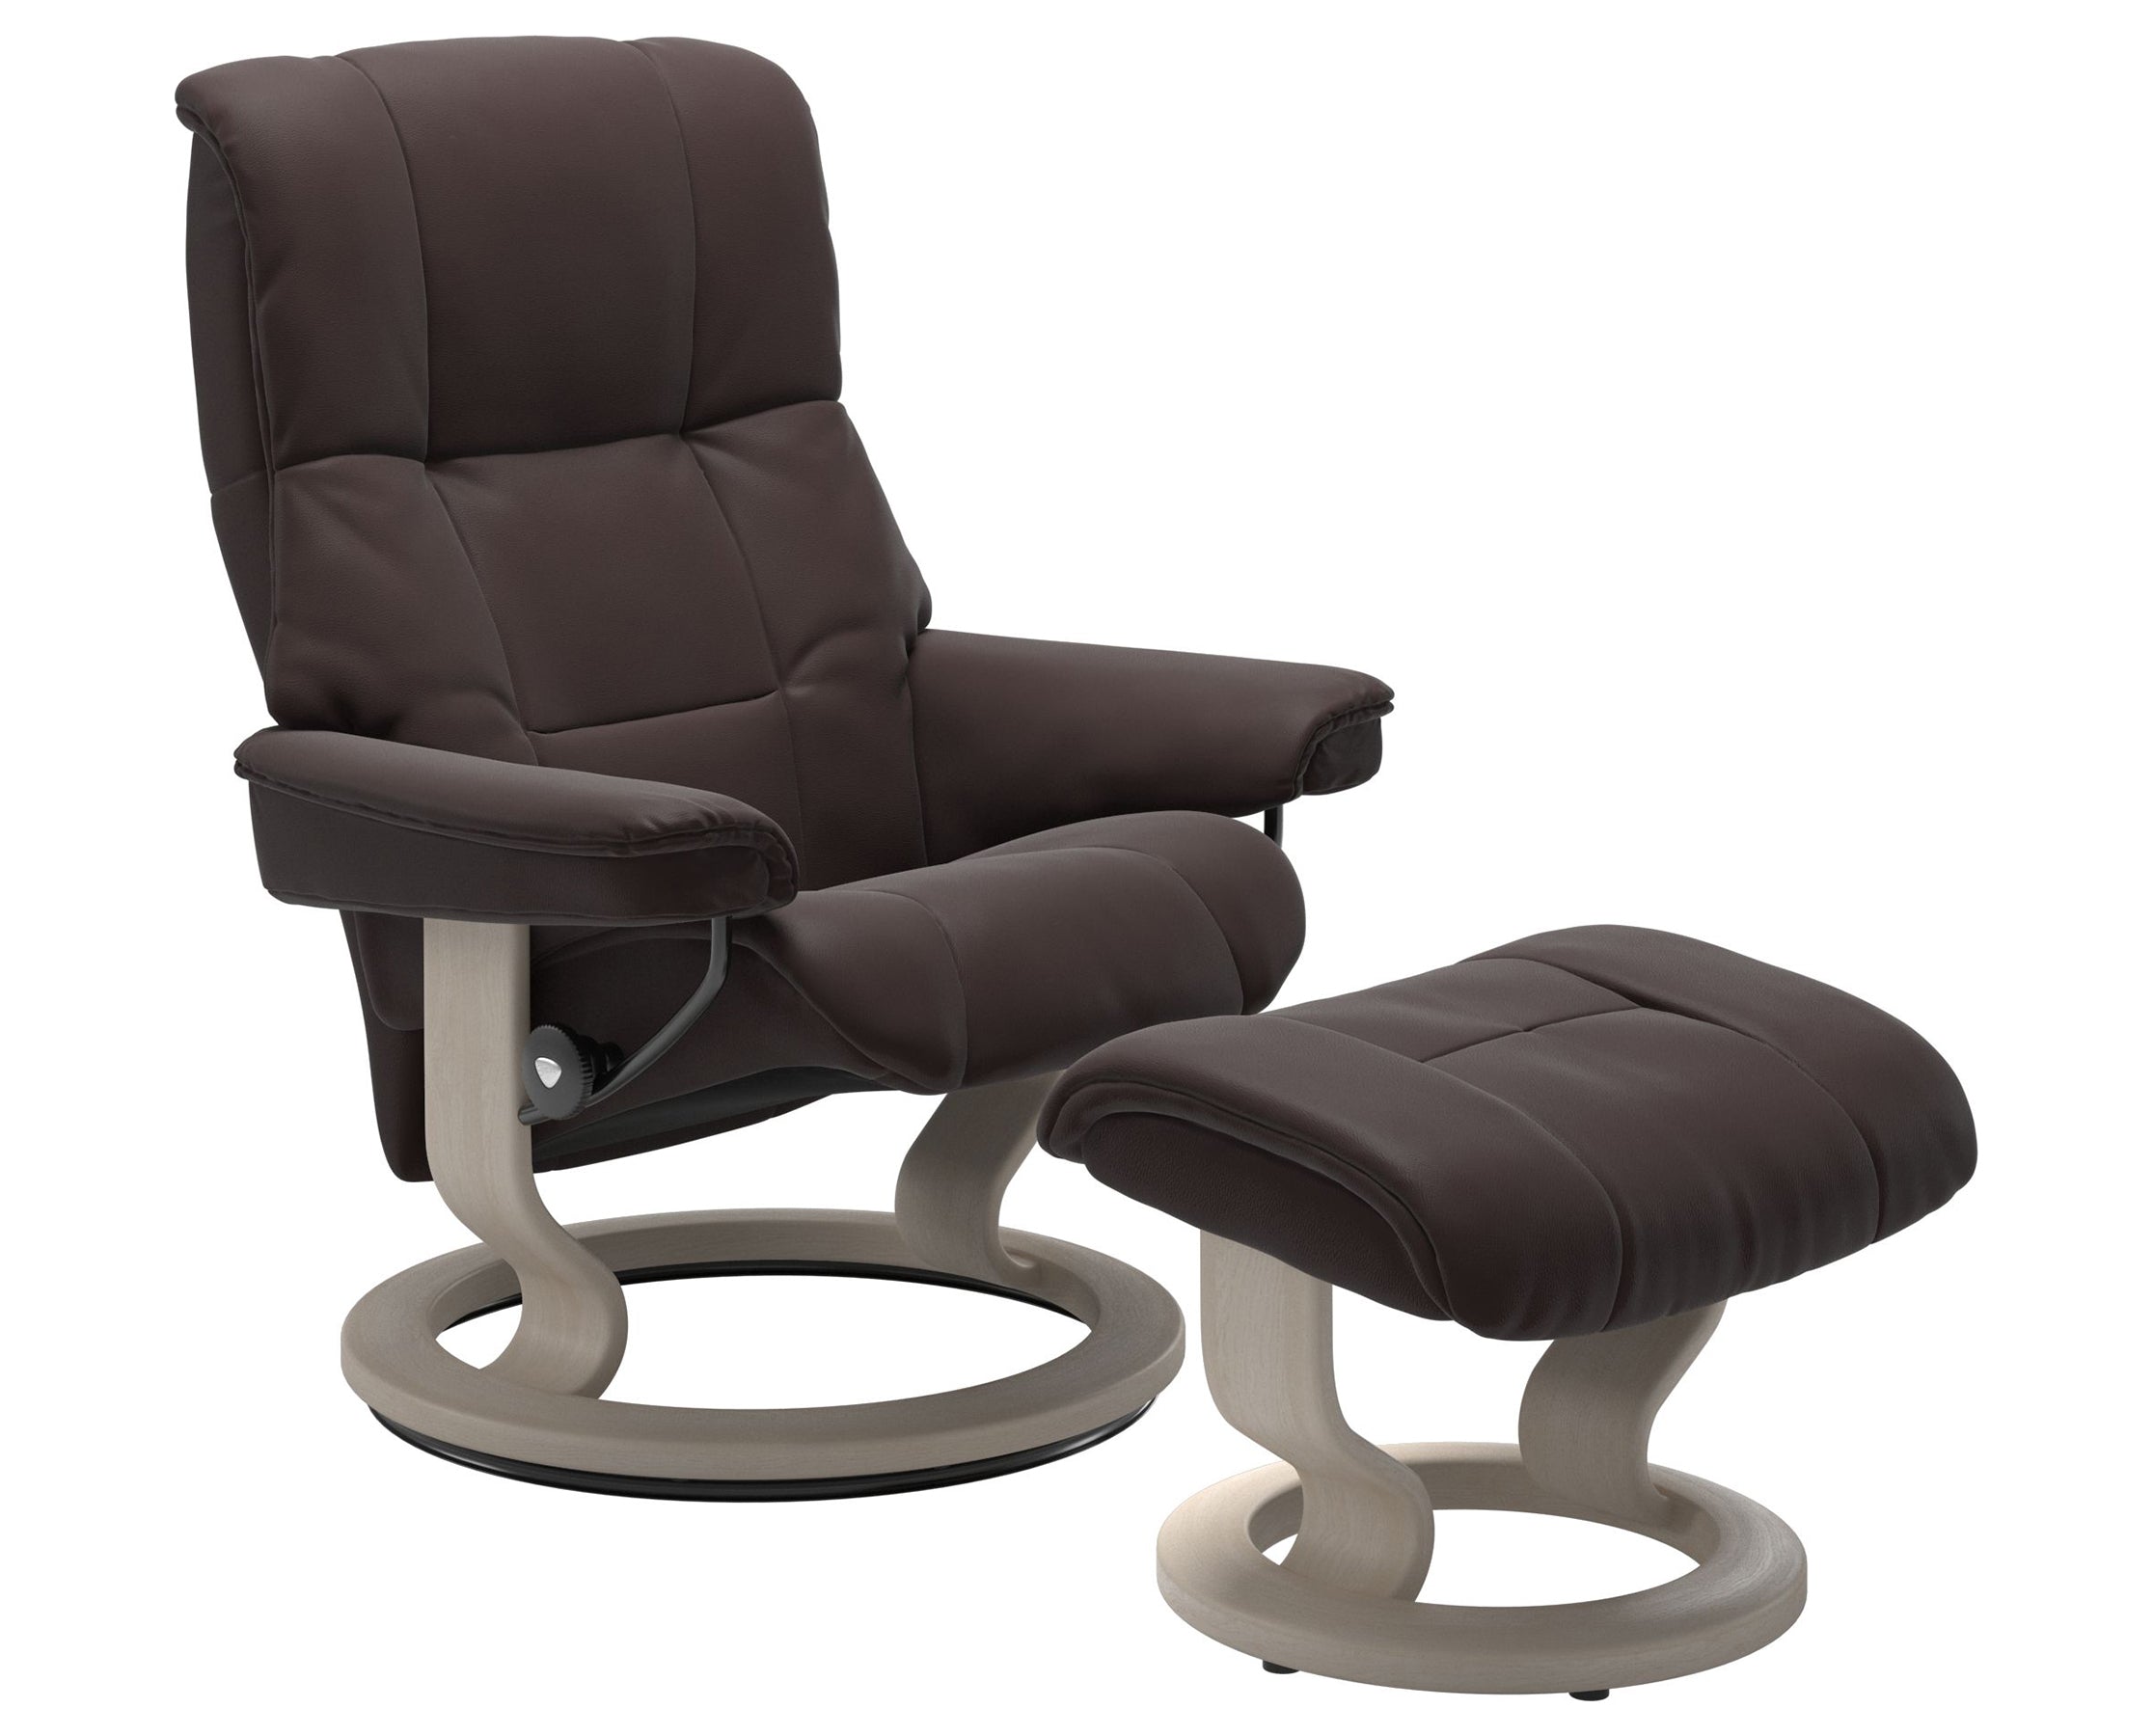 Paloma Leather Chocolate S/M/L and Whitewash Base | Stressless Mayfair Classic Recliner | Valley Ridge Furniture